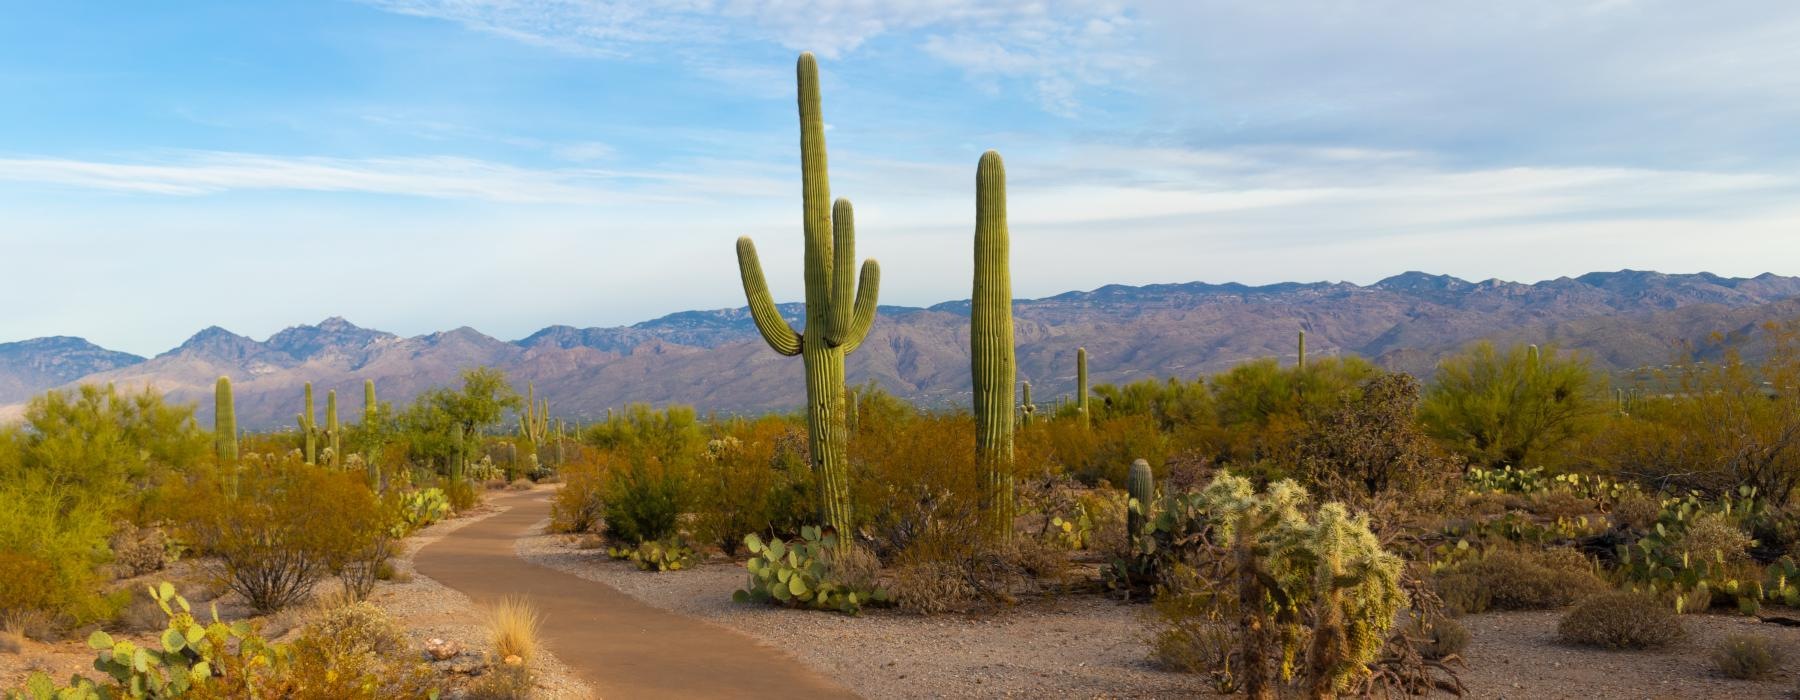 a dirt road with cactus and mountains in the background